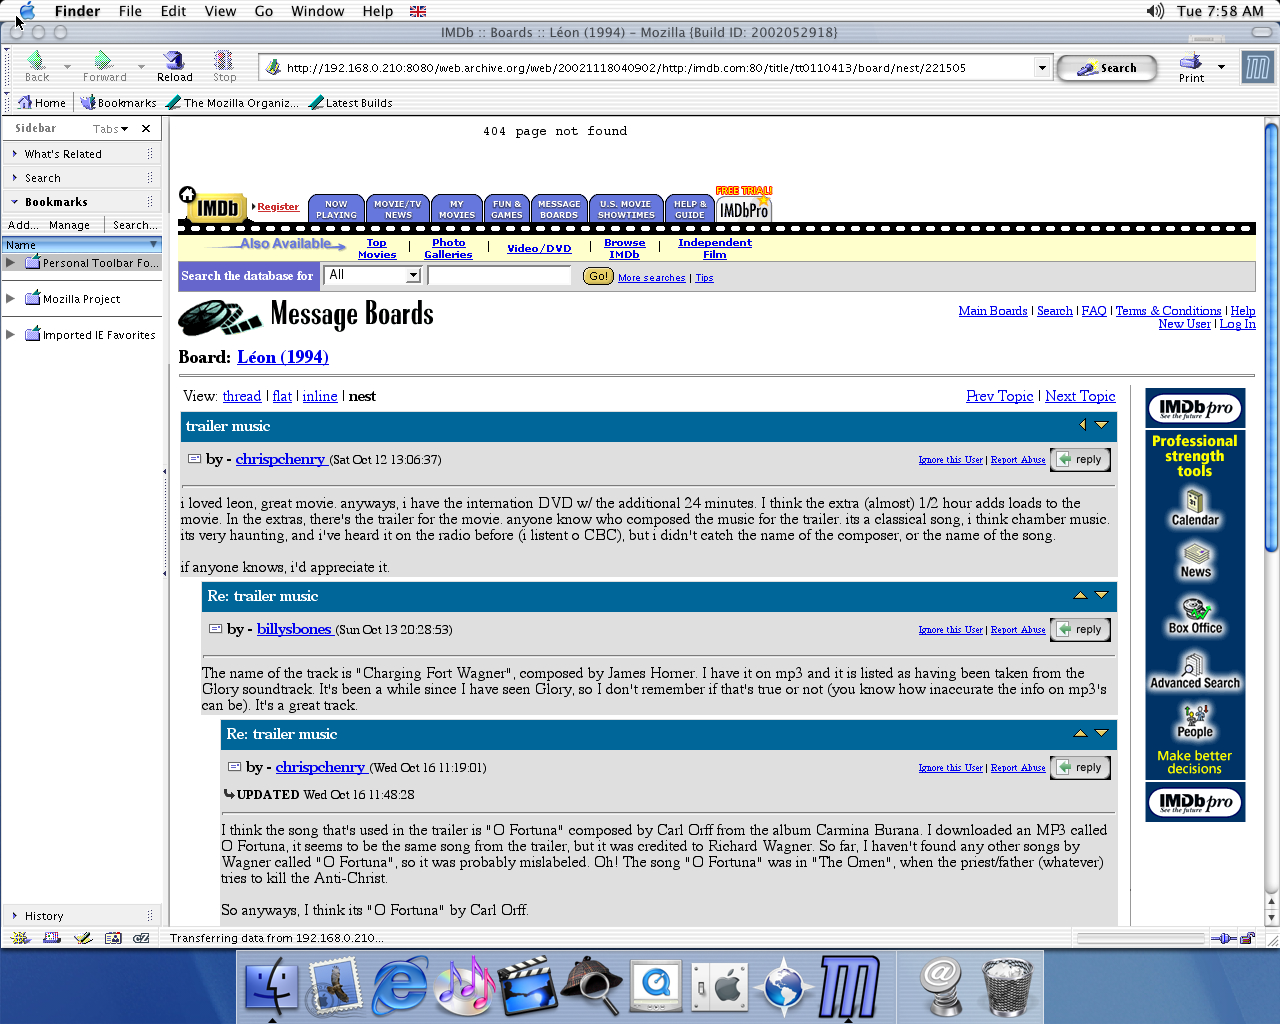 OS X 10.1 PPC with Mozilla Suite 1.0 displaying a page from IMDB archived at November 18, 2002 at 04:09:02